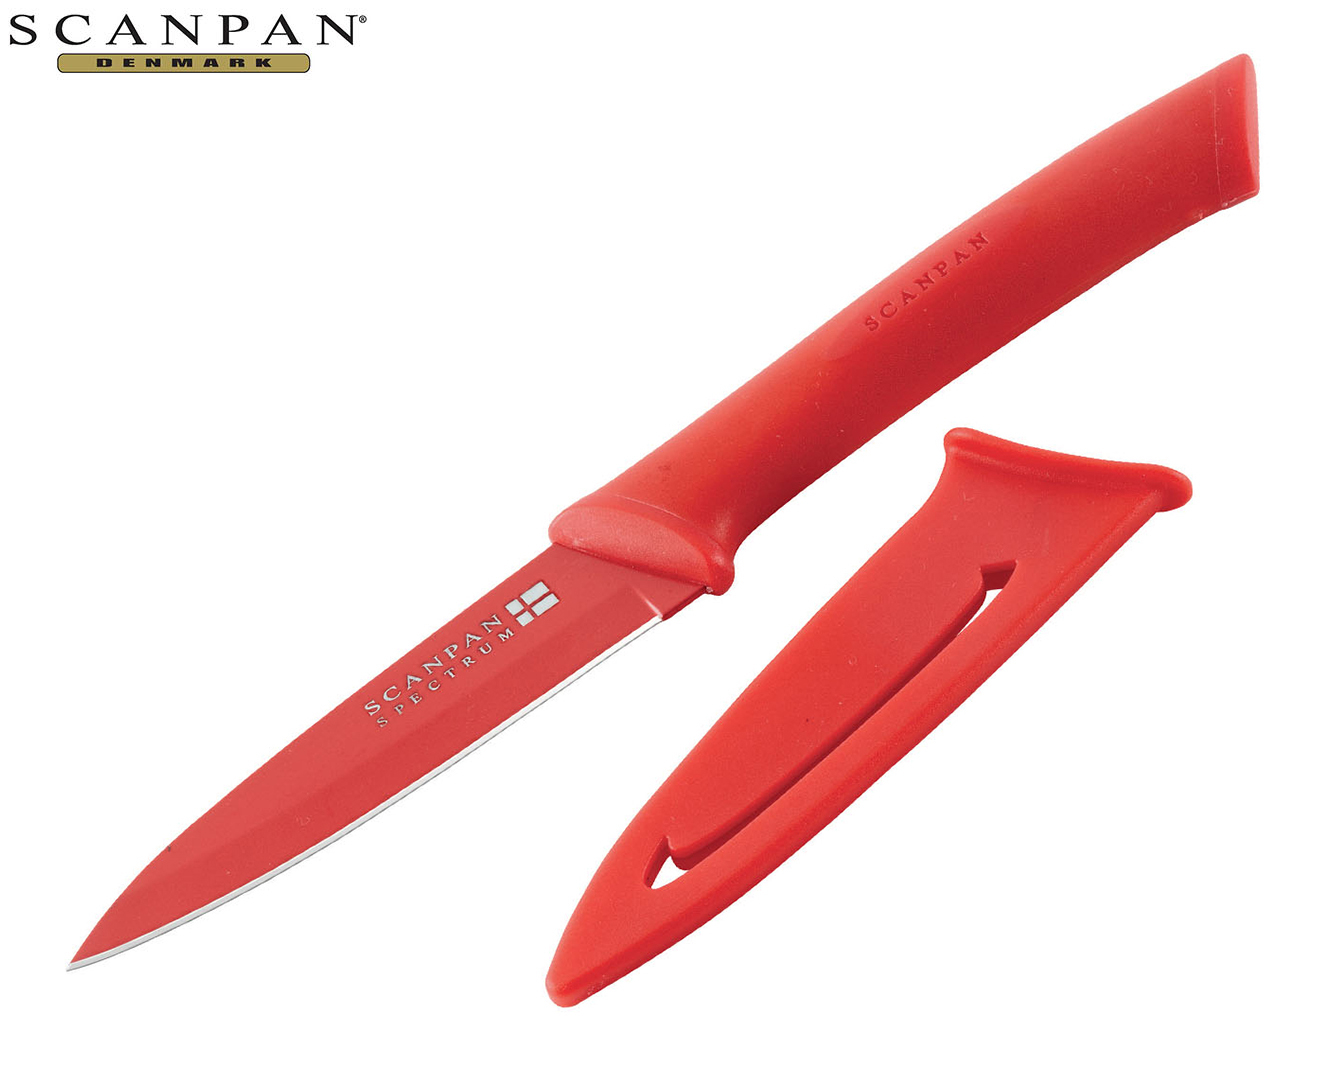 Scanpan Spectrum Soft Touch Utility Knife 9.5cm Red